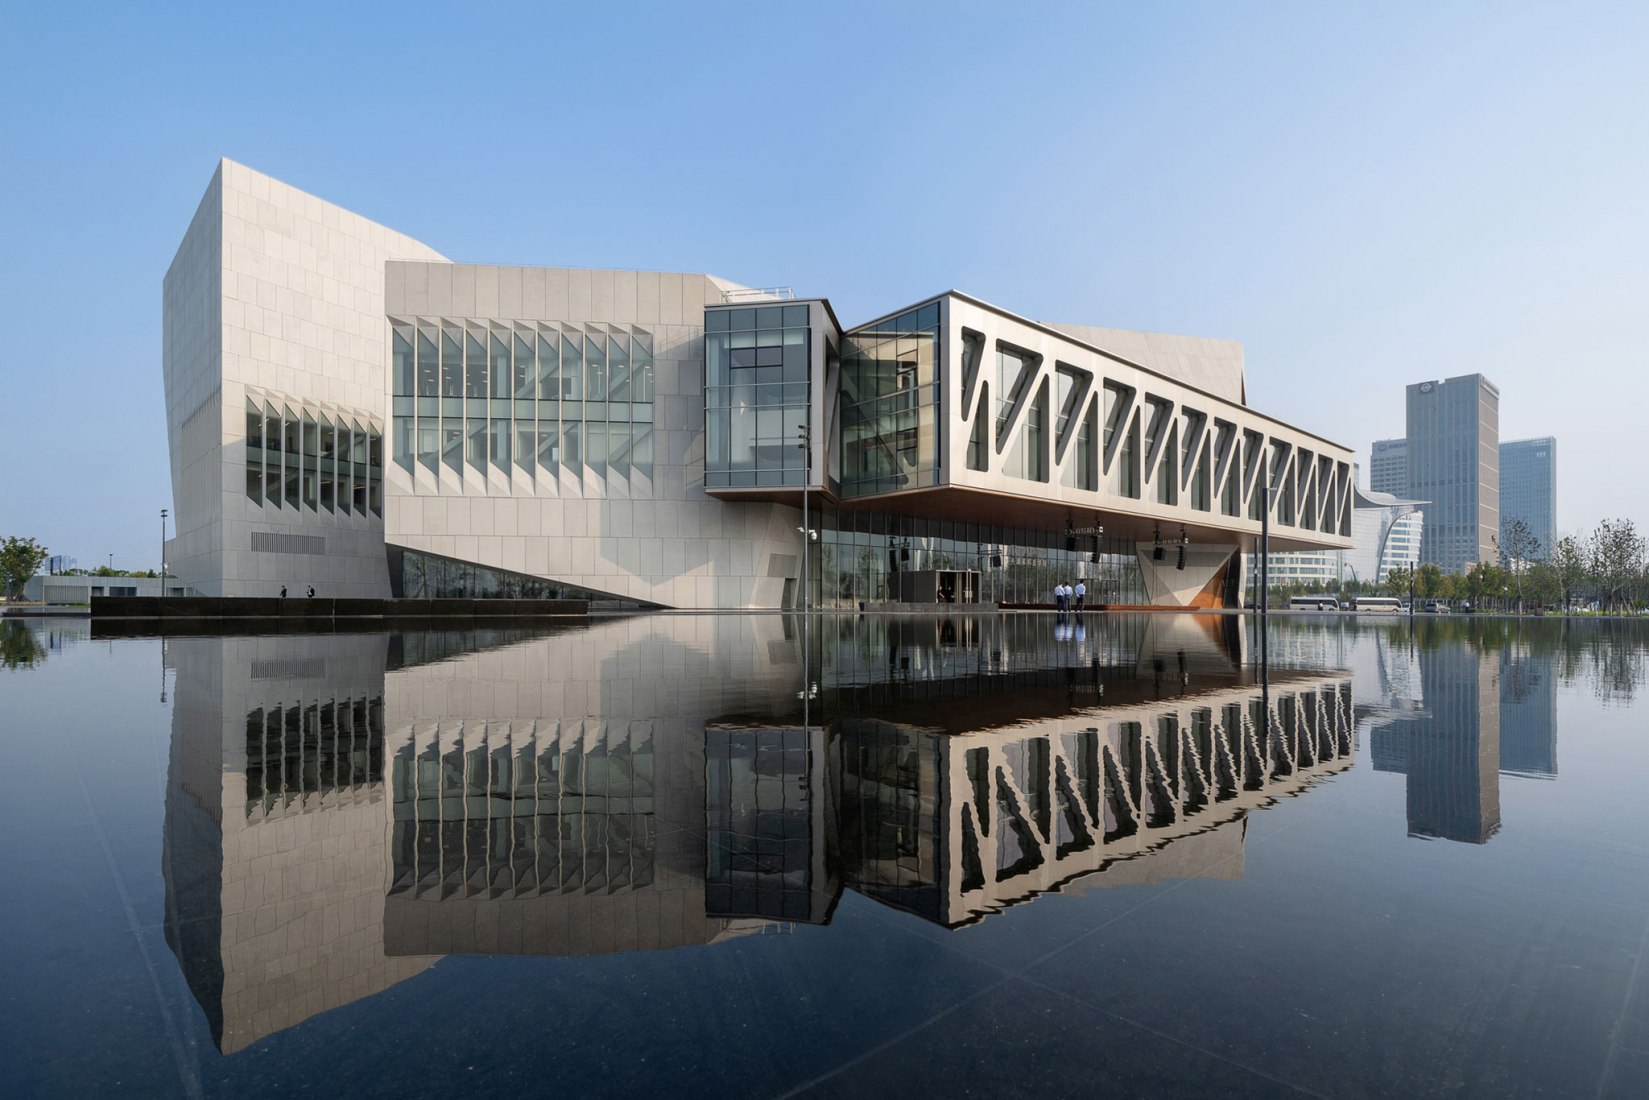 TJS campus by Diller Scofidio + Renfro. Photograph by Zhang Chao. Image courtesy of Tianjin Juilliard.